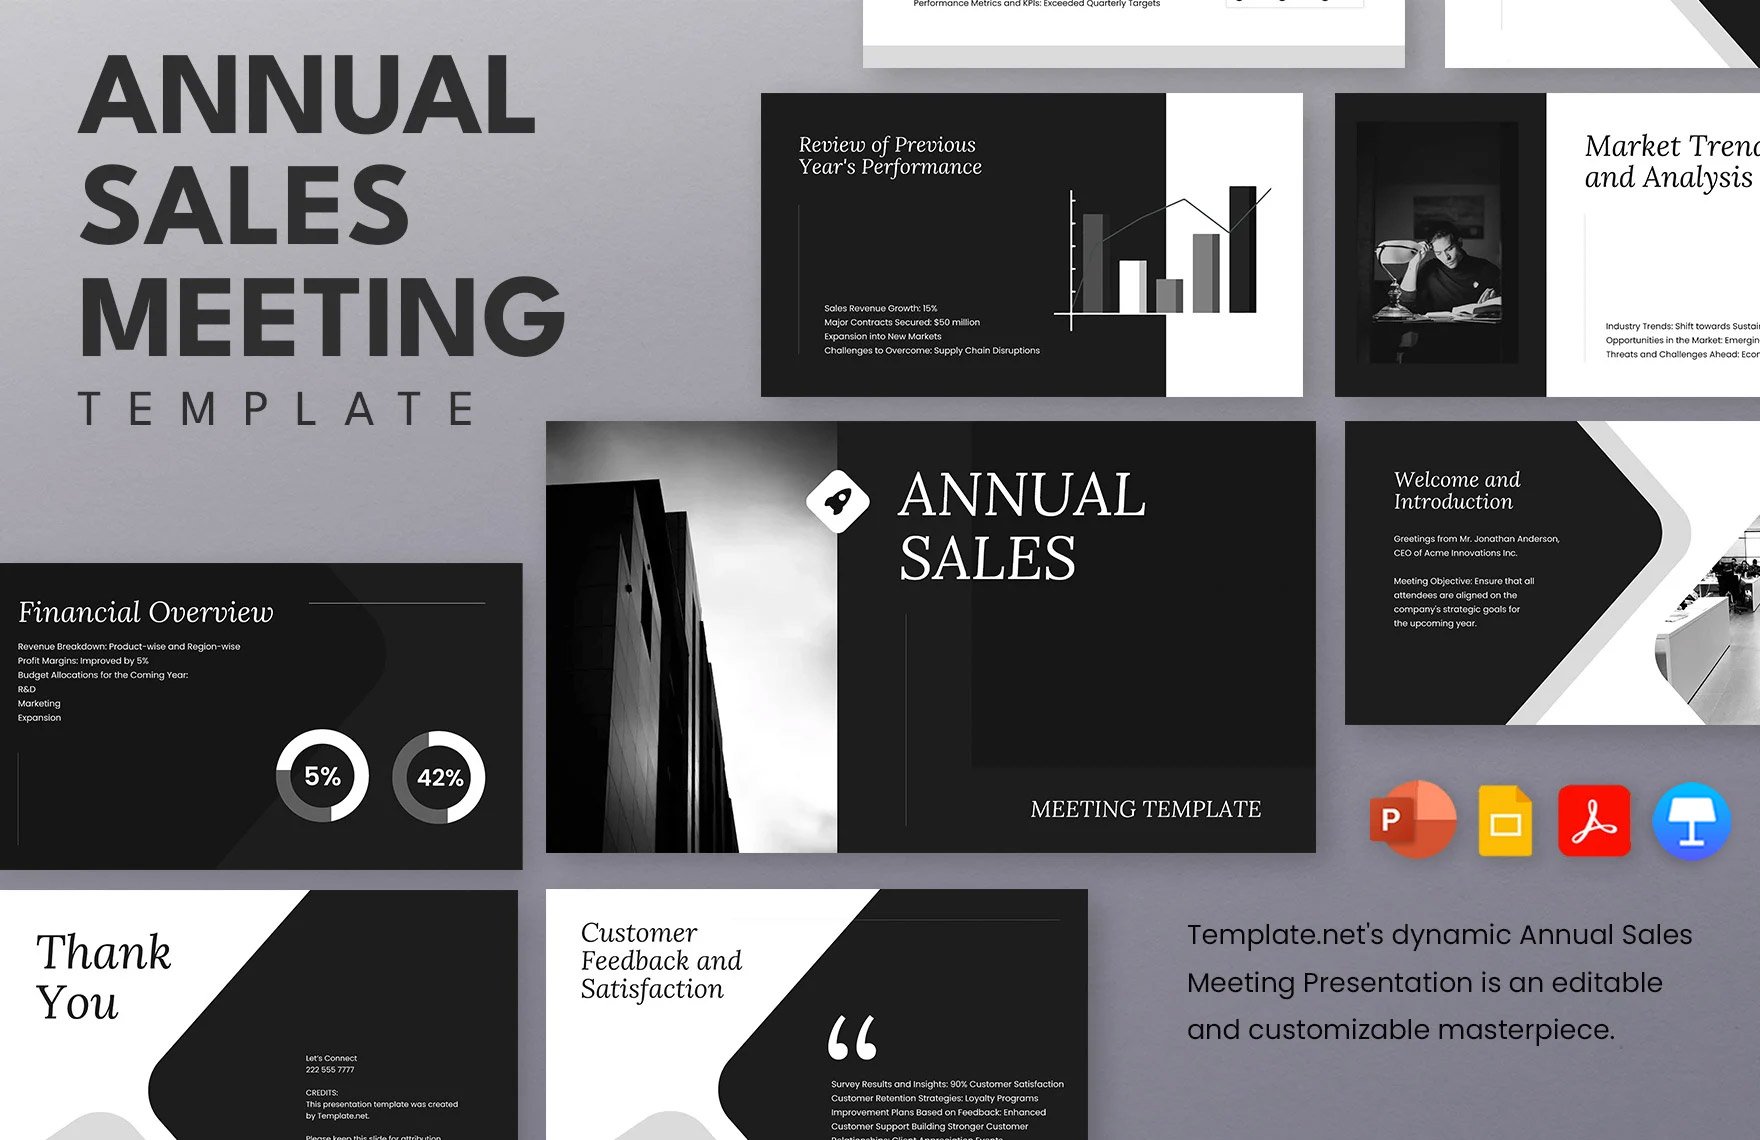 Annual Sales Meeting Template